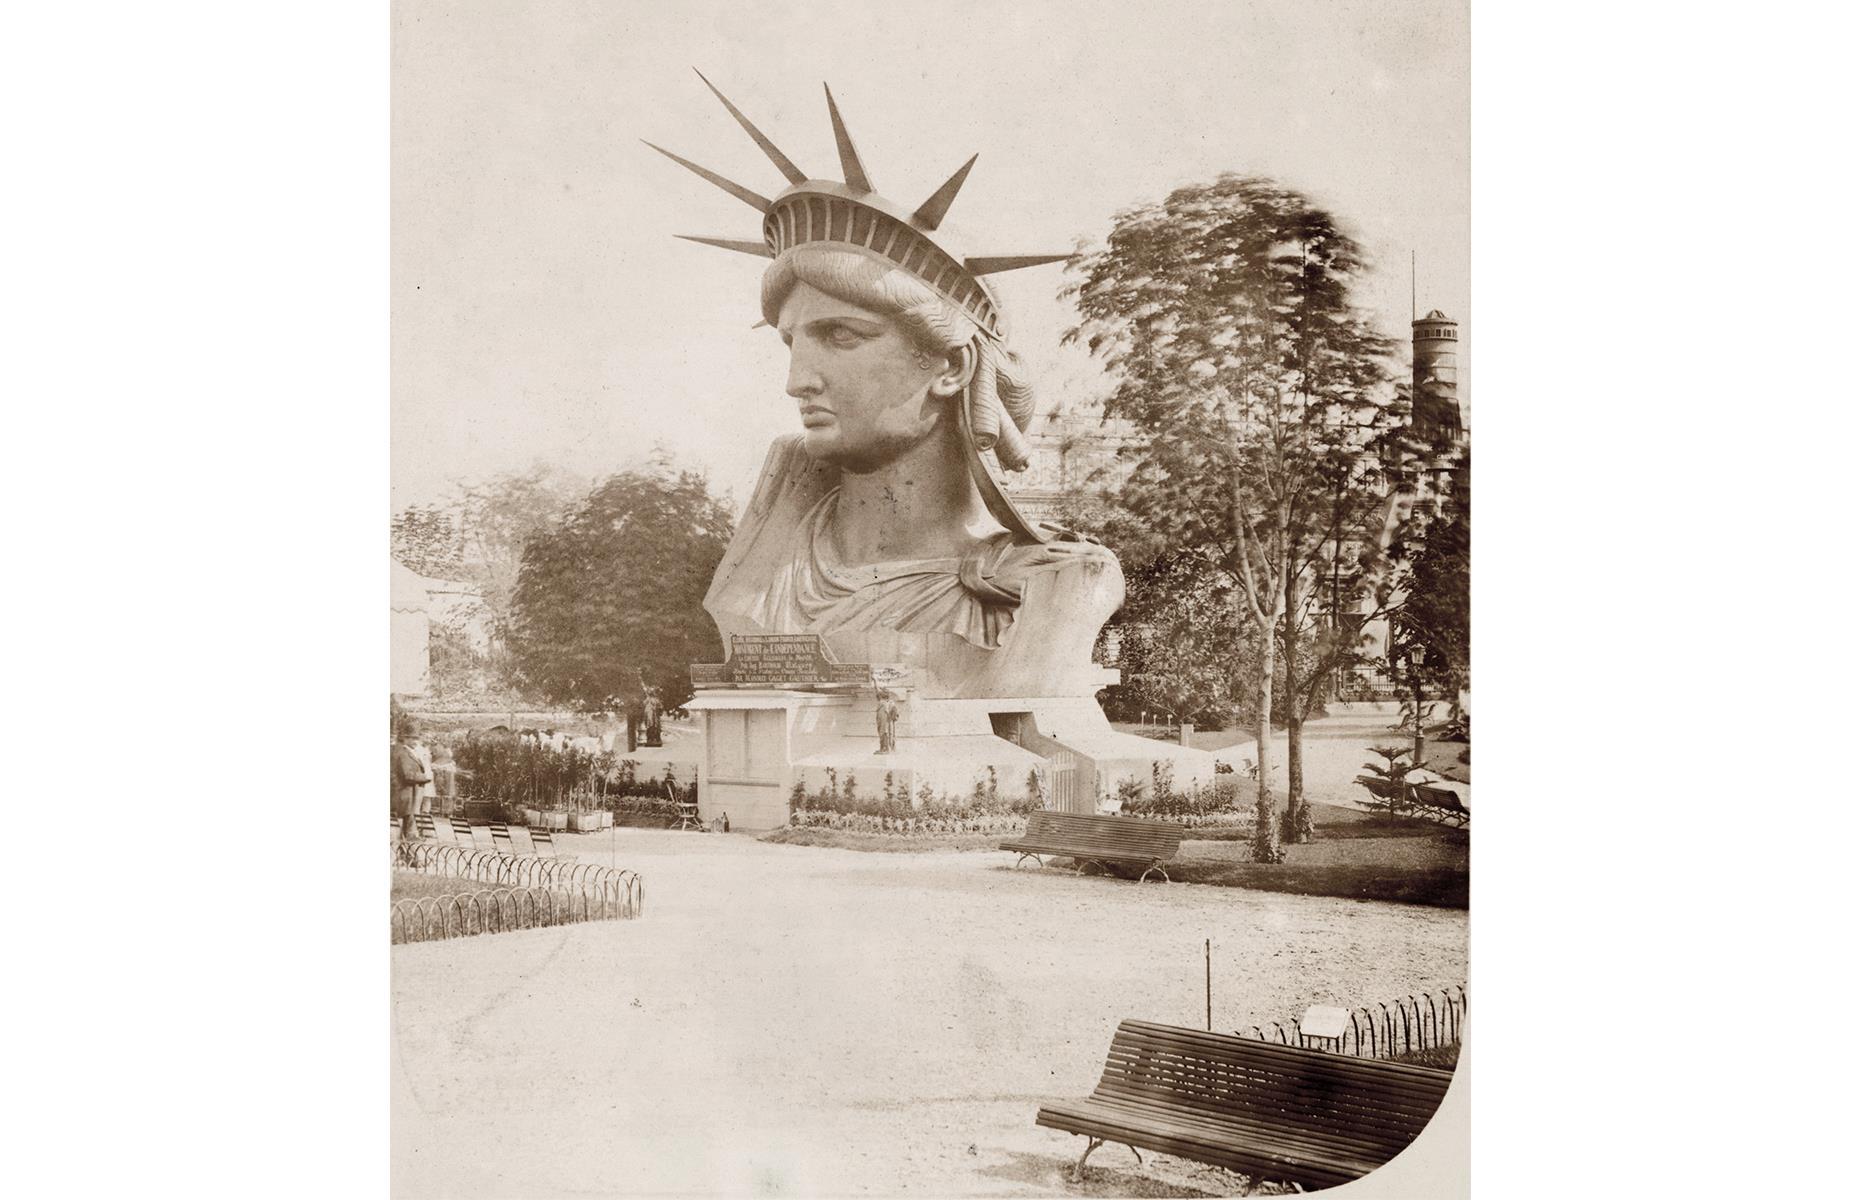 <p>This famous statue didn’t start its life in New York – in fact, it was displayed at the Paris World’s Fair in 1878 (pictured), before being given to the US by France in 1886, to commemorate the alliance between the two countries during the American Revolution. A few decades later, the majestic statue on Liberty Island had become one of the city’s – and world's – best-loved landmarks.</p>